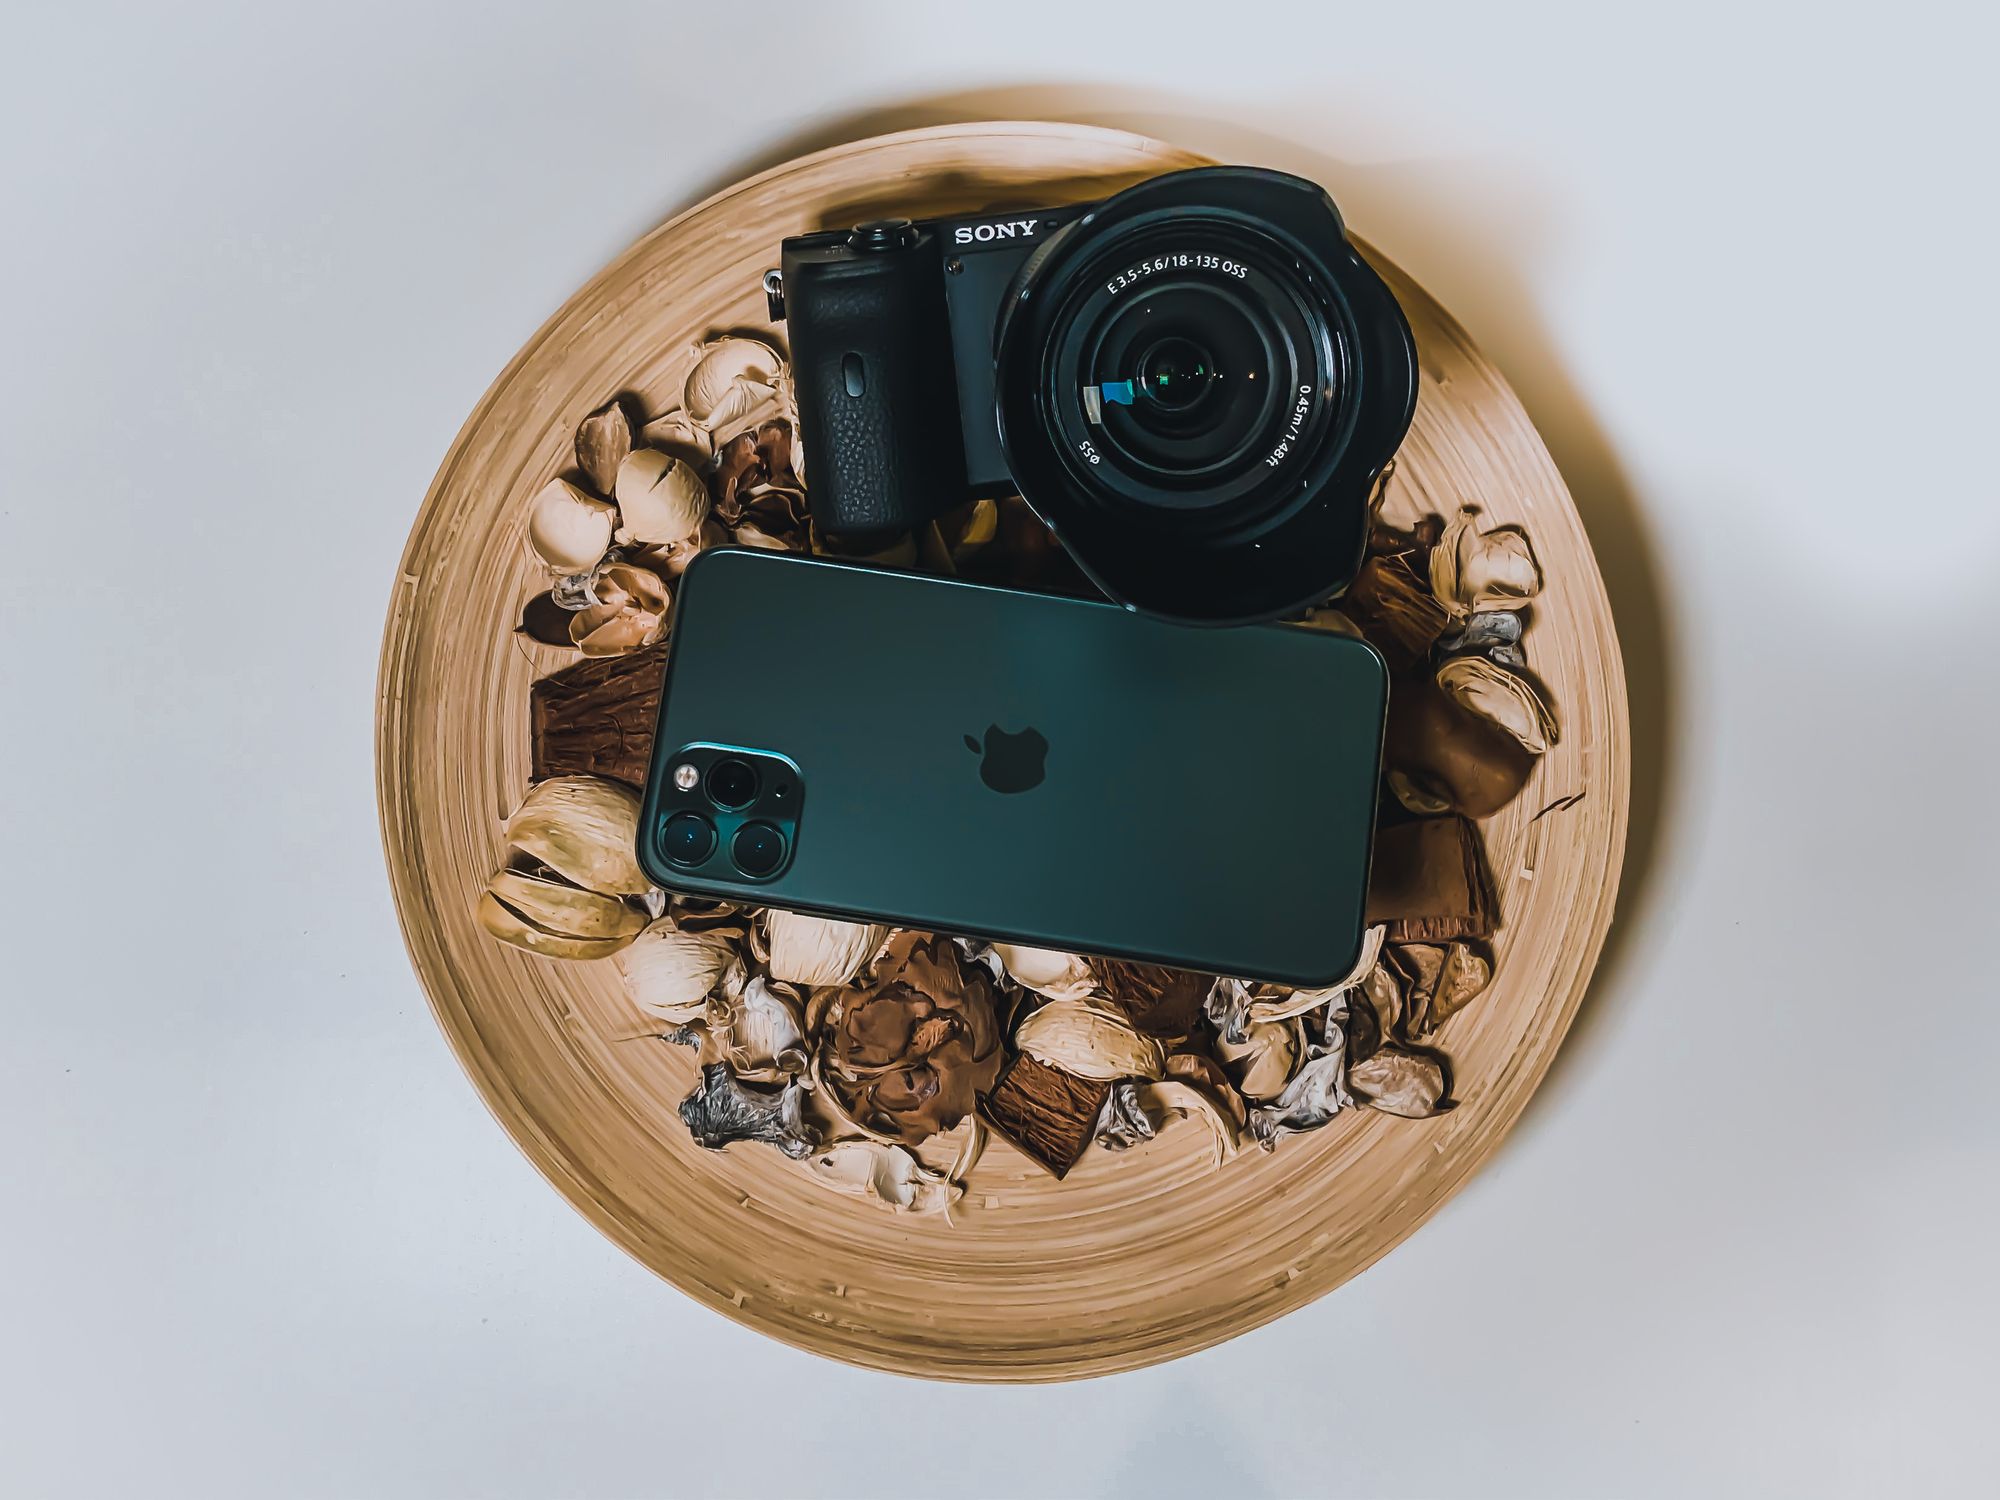 Teste Cego: iPhone vs Sony a6600 - Parte 1 post image